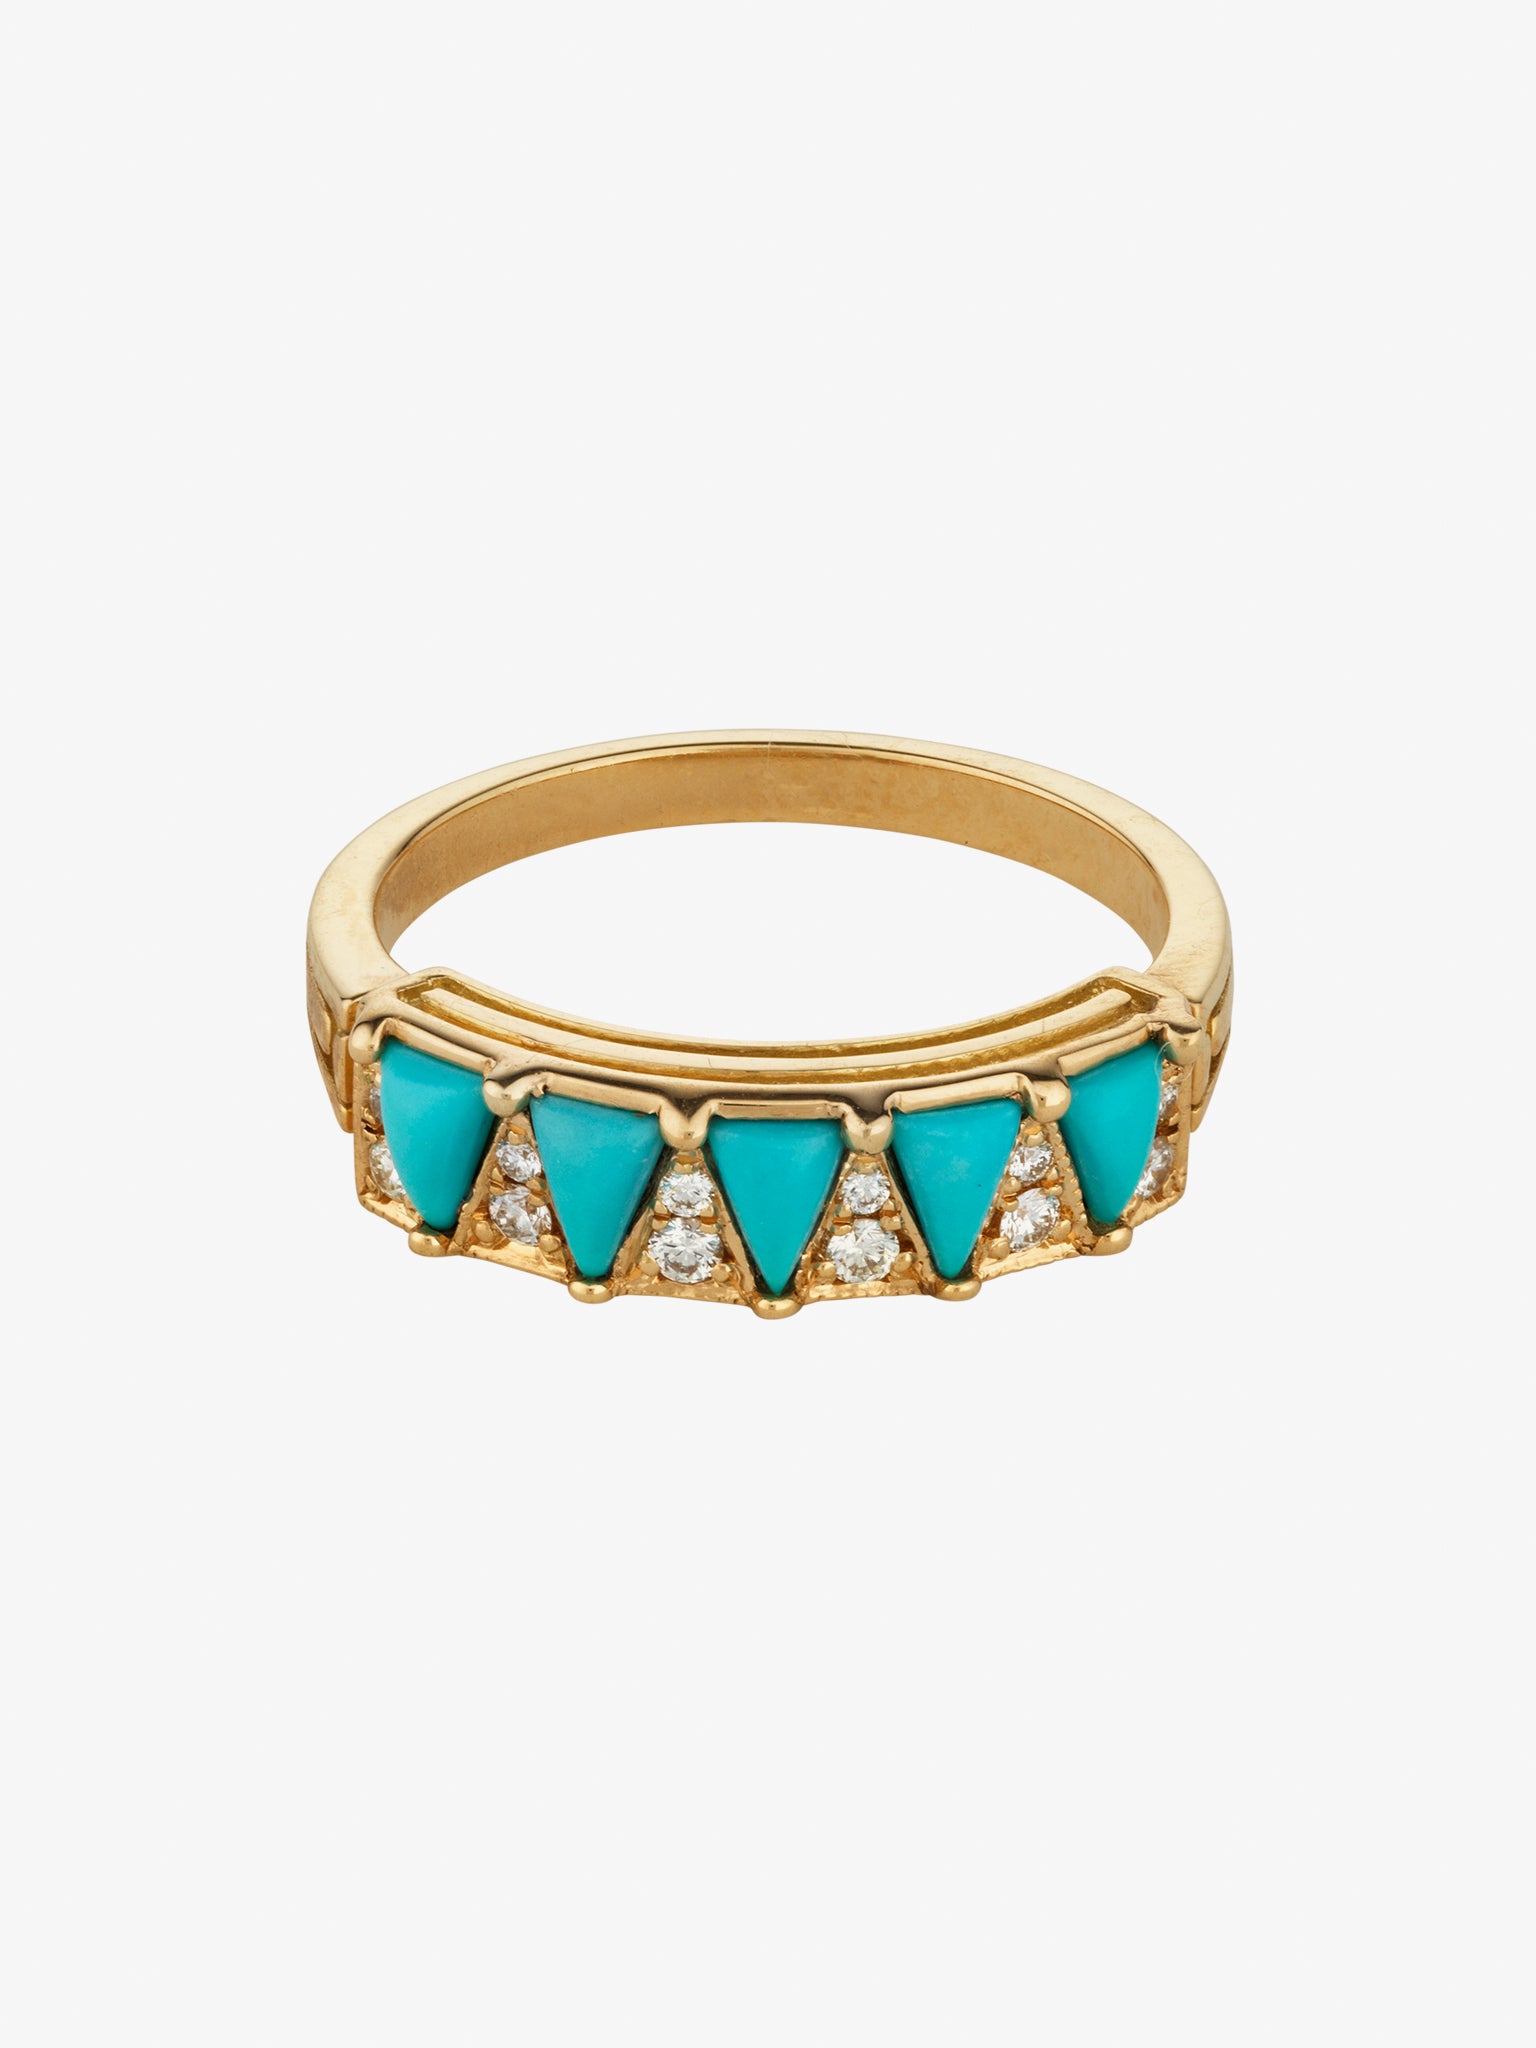 Turquoise five triangle ring